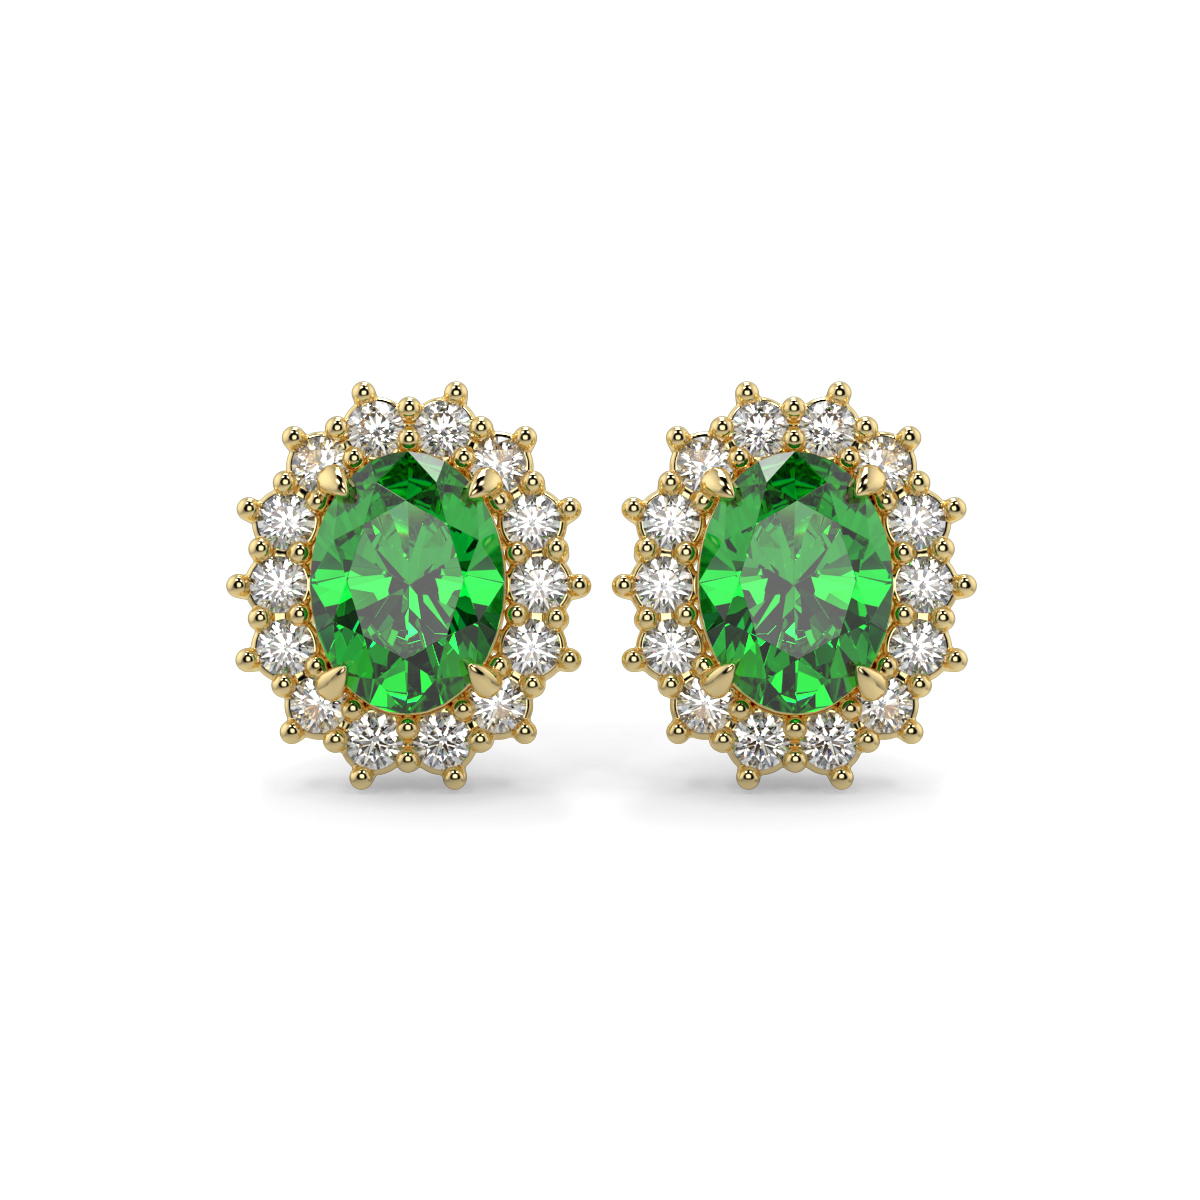 Emerald and Diamond Lady Diana Halo Earrings Yellow Gold - CAMILLE